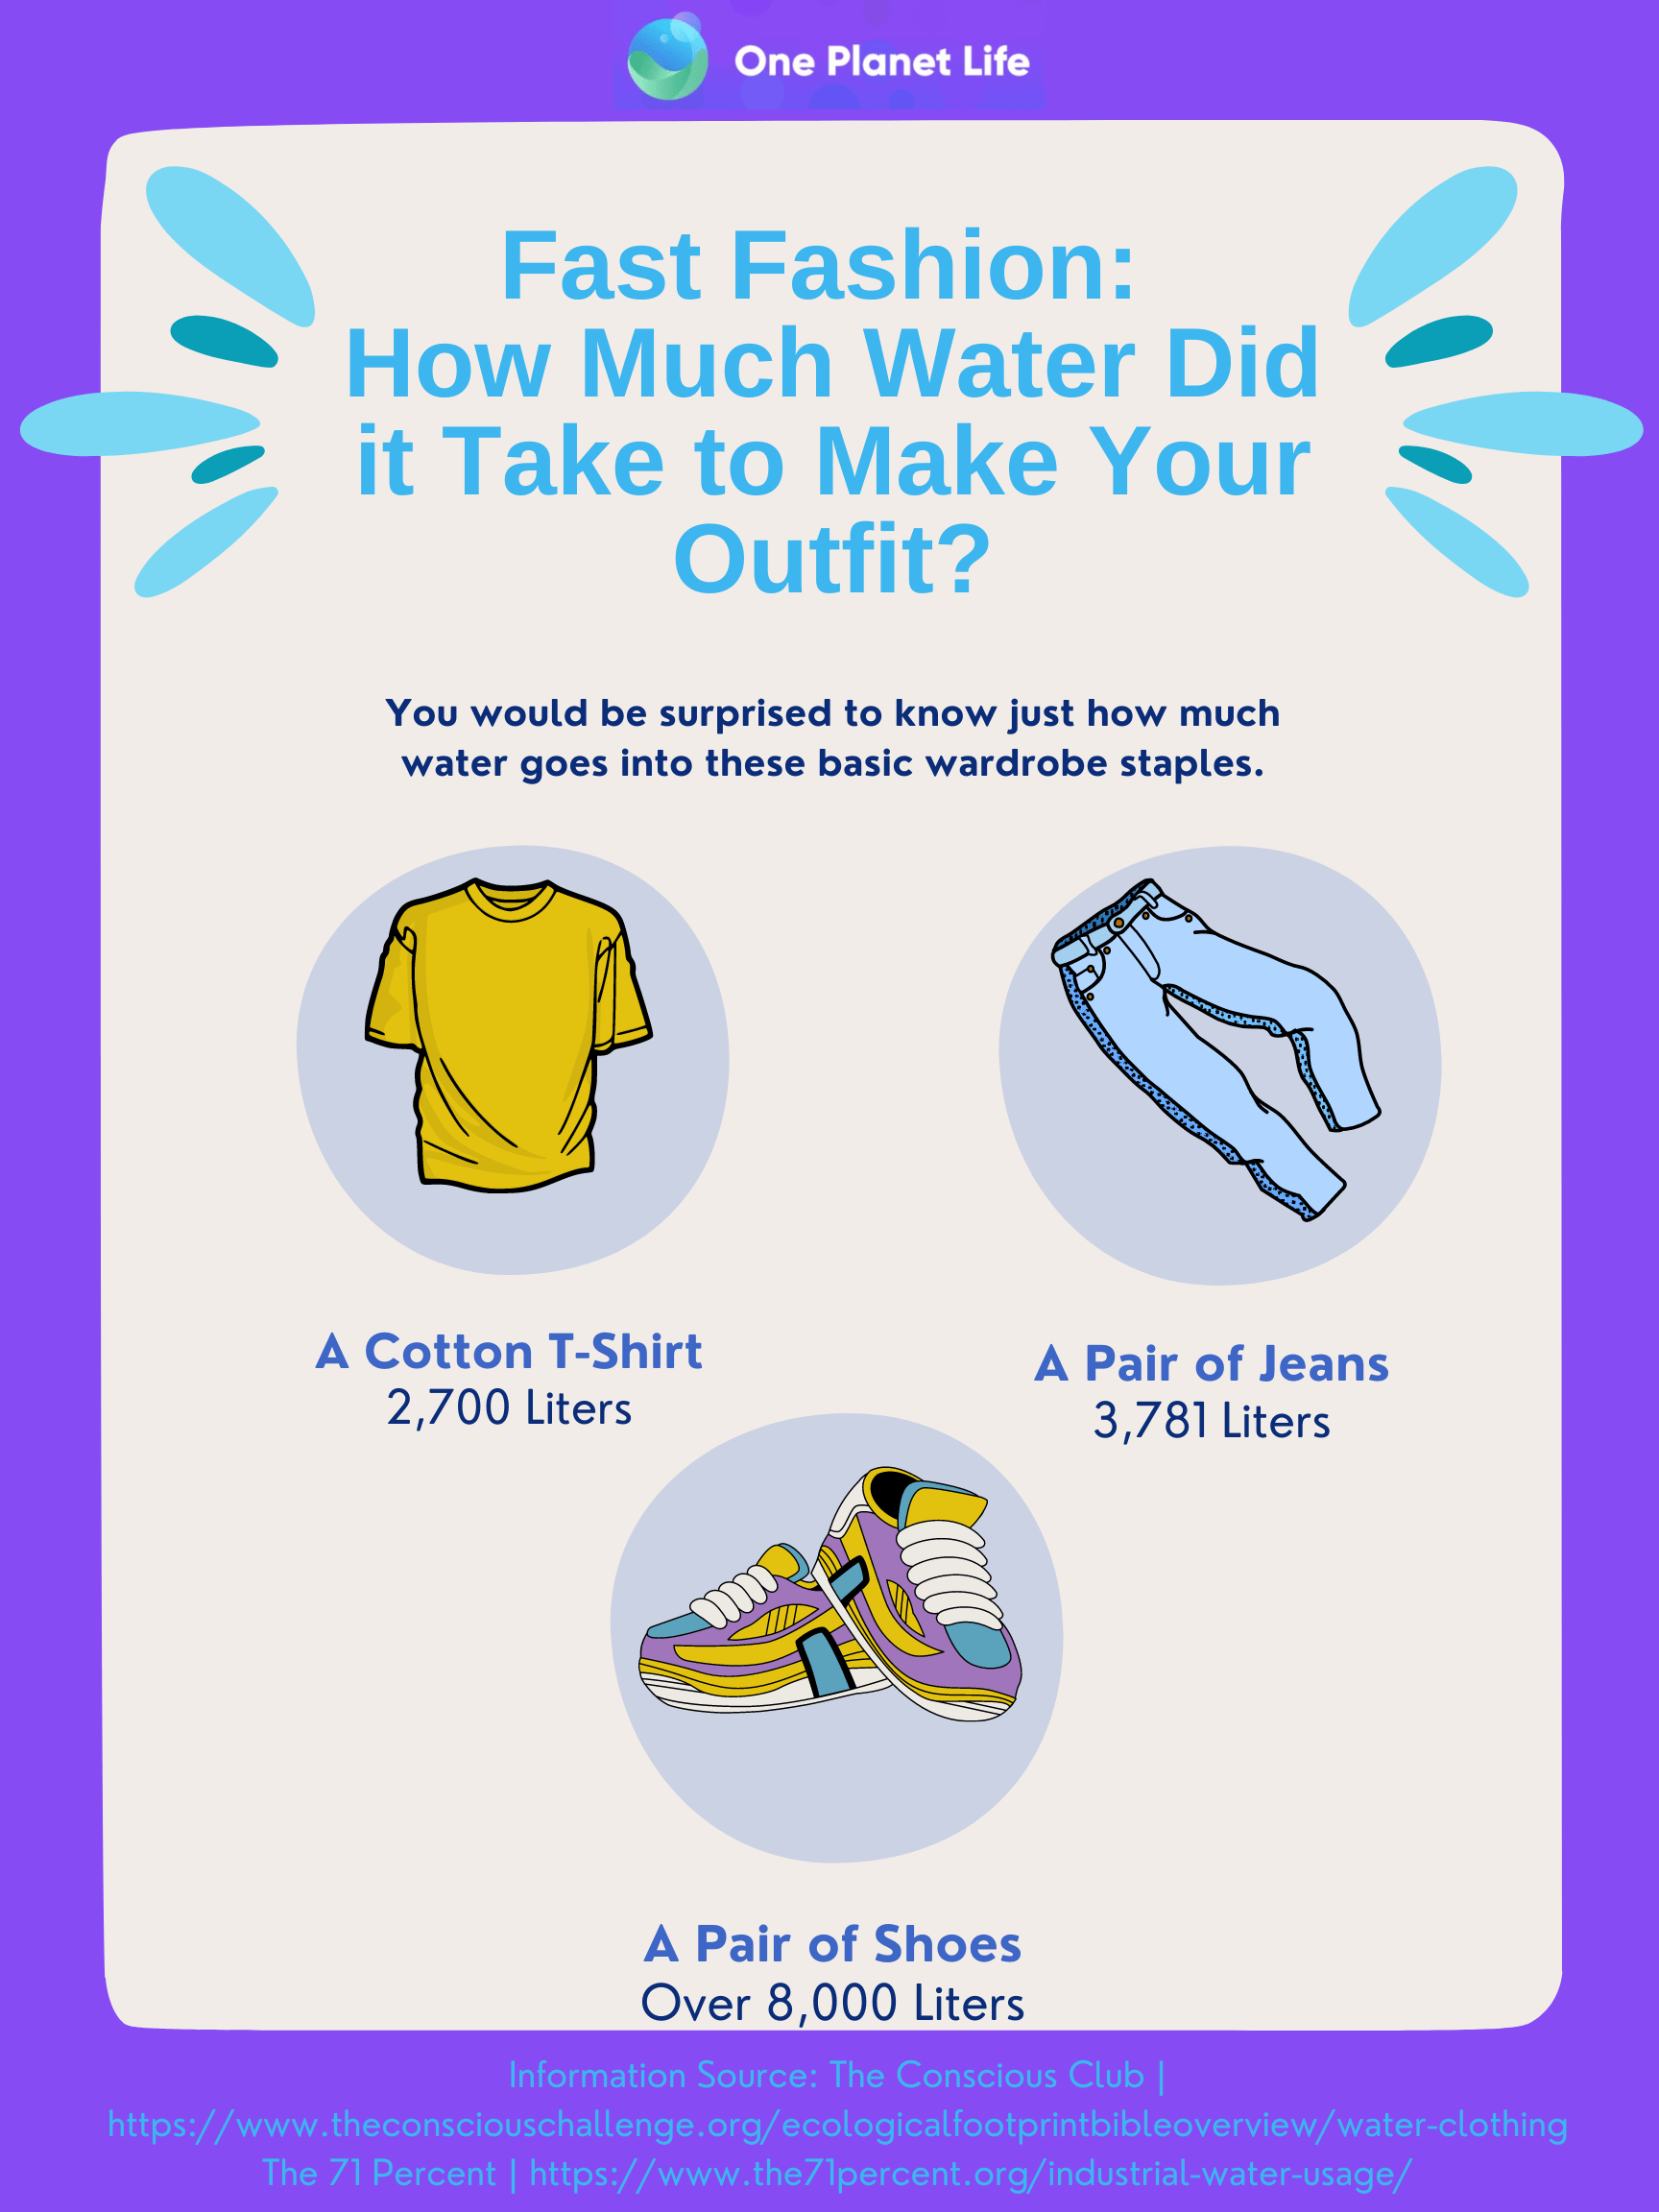 The amount of water used to make your new outfit